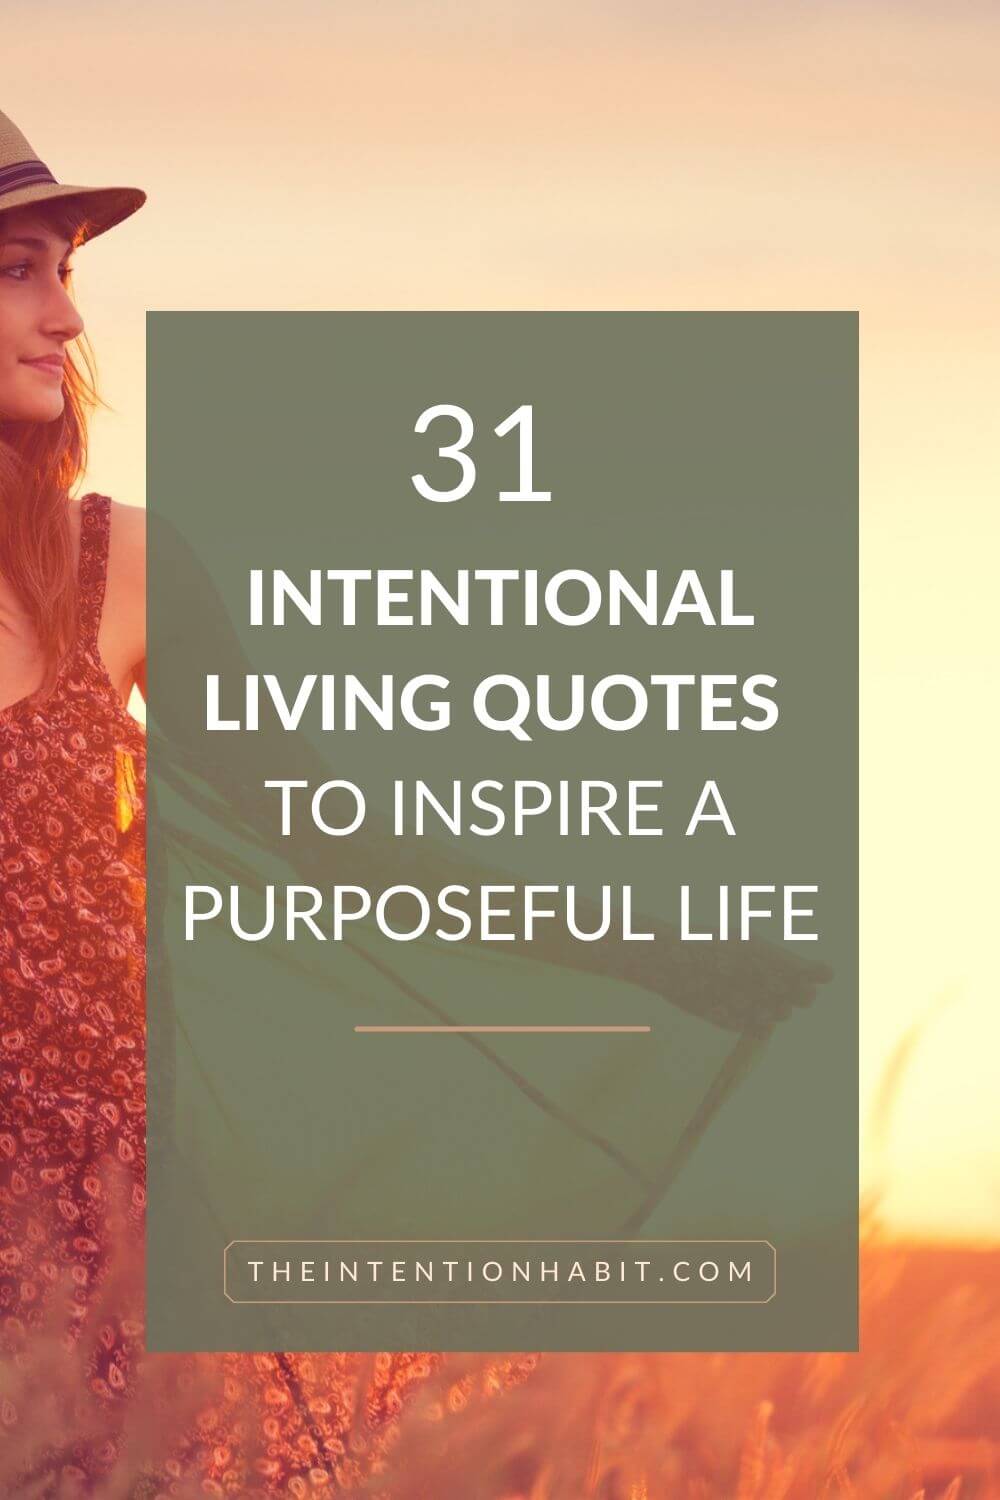 Intentional living quotes to inspire a purposeful life